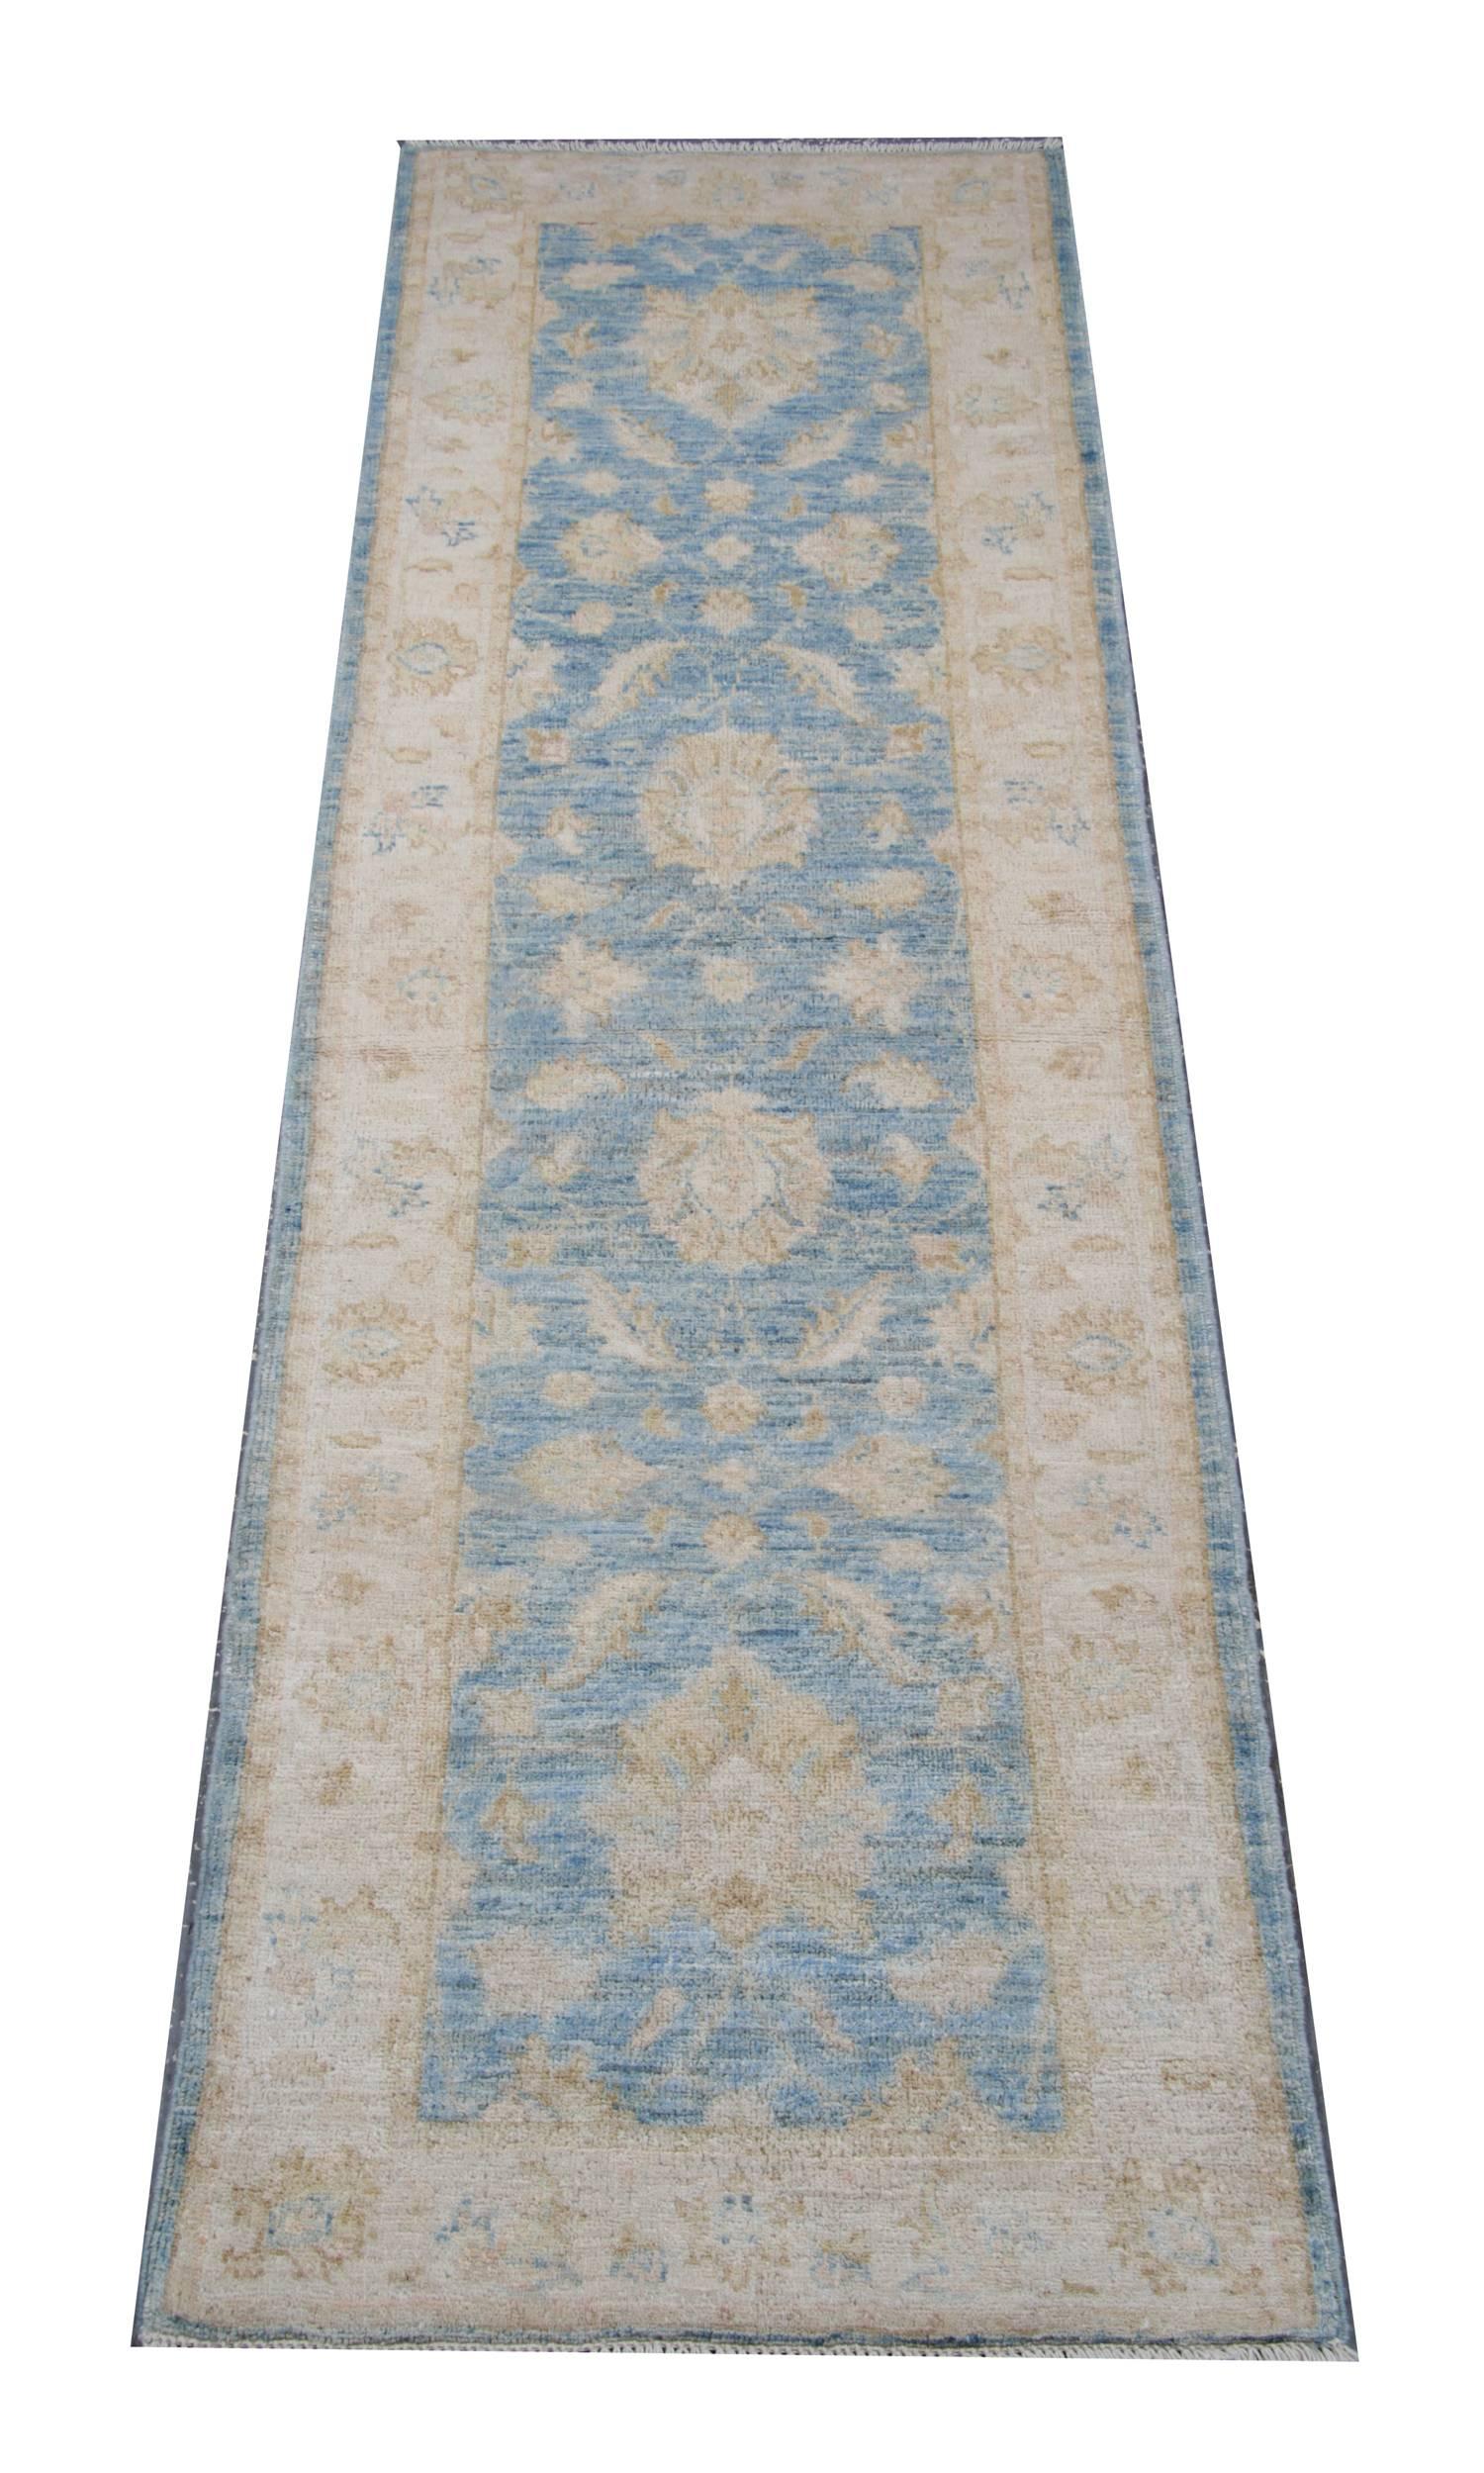 This is Ziegler Sultanabad runner made on our own looms by our master weavers in Afghanistan, it is made with all natural vegetable dyes all hand spun wool. The large-scale design makes these rugs the most unique. It is a one of a kind piece.